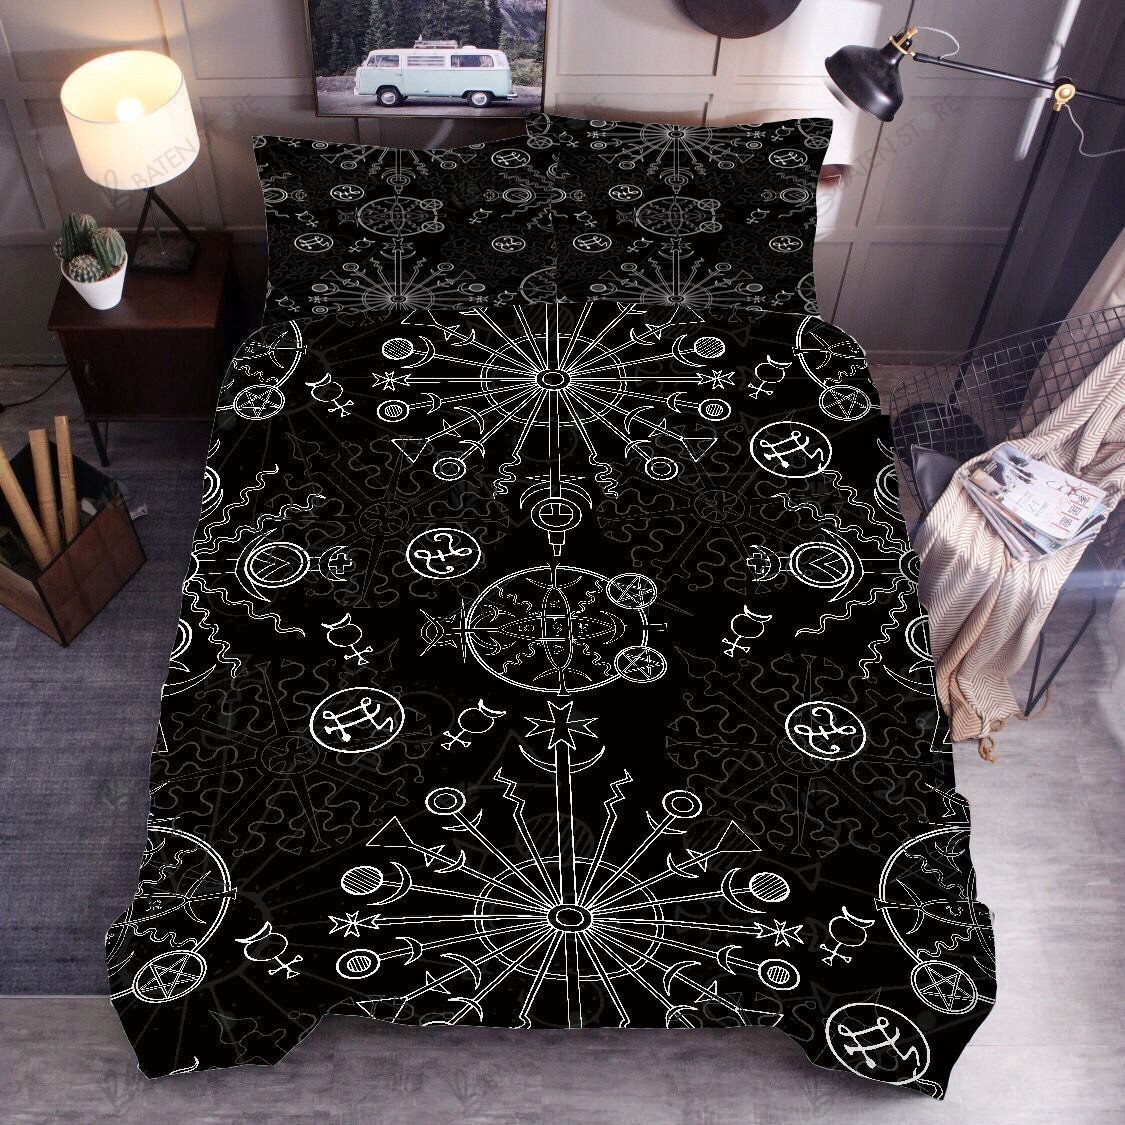 3d black tarot bed sheets duvet cover bedding set perfect presents for birthdays christmas and thanksgiving xzpth